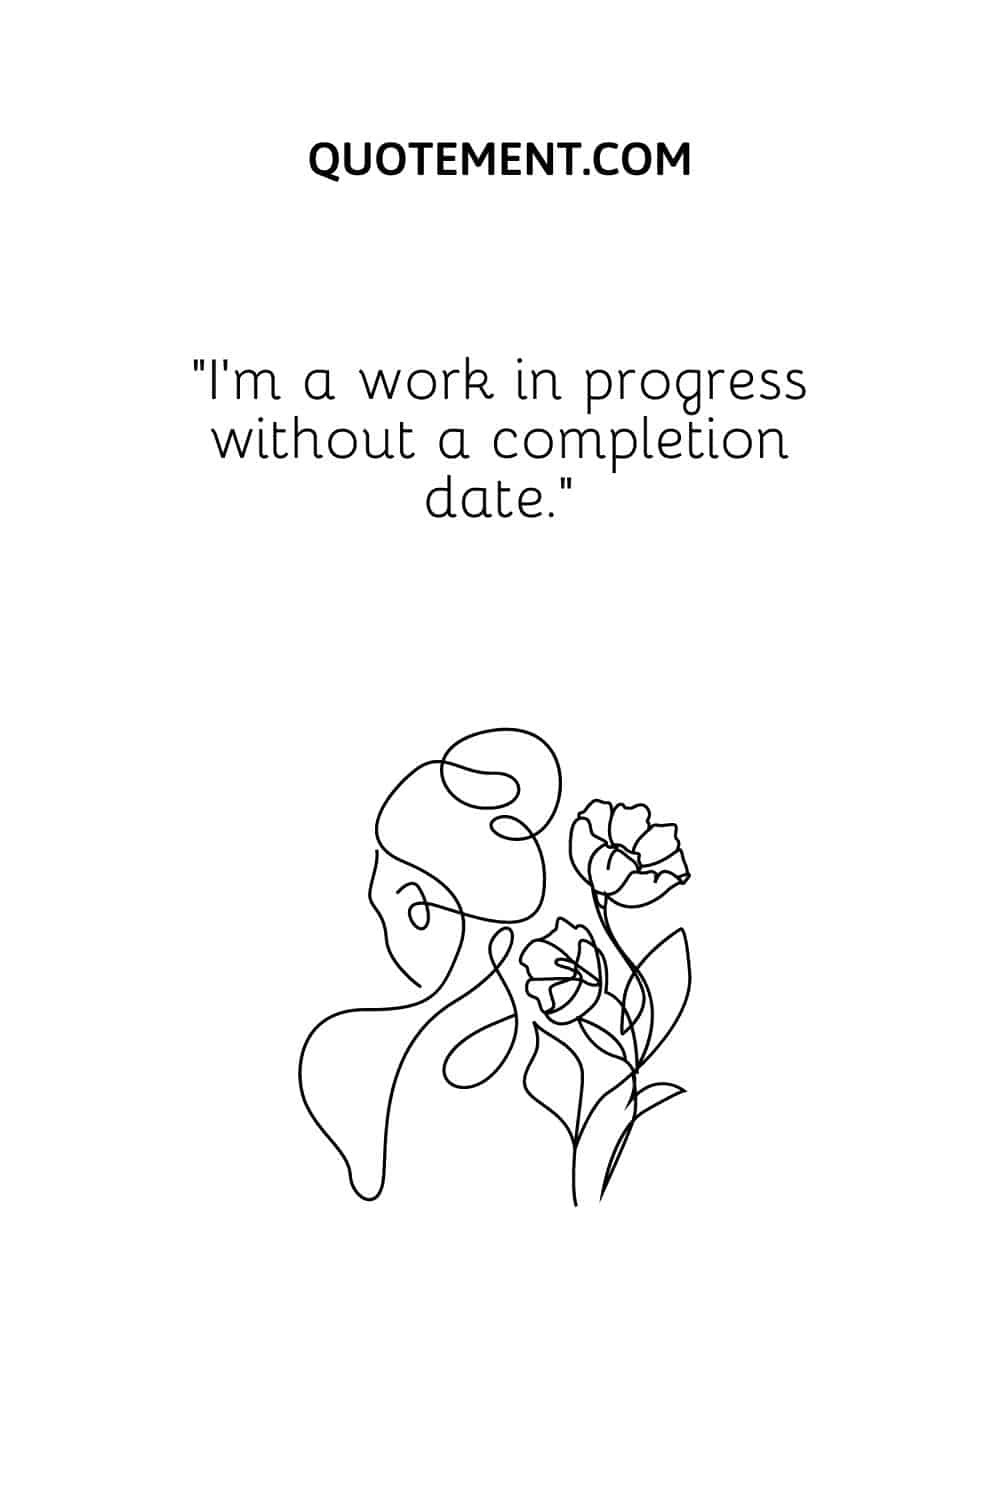 I’m a work in progress without a completion date